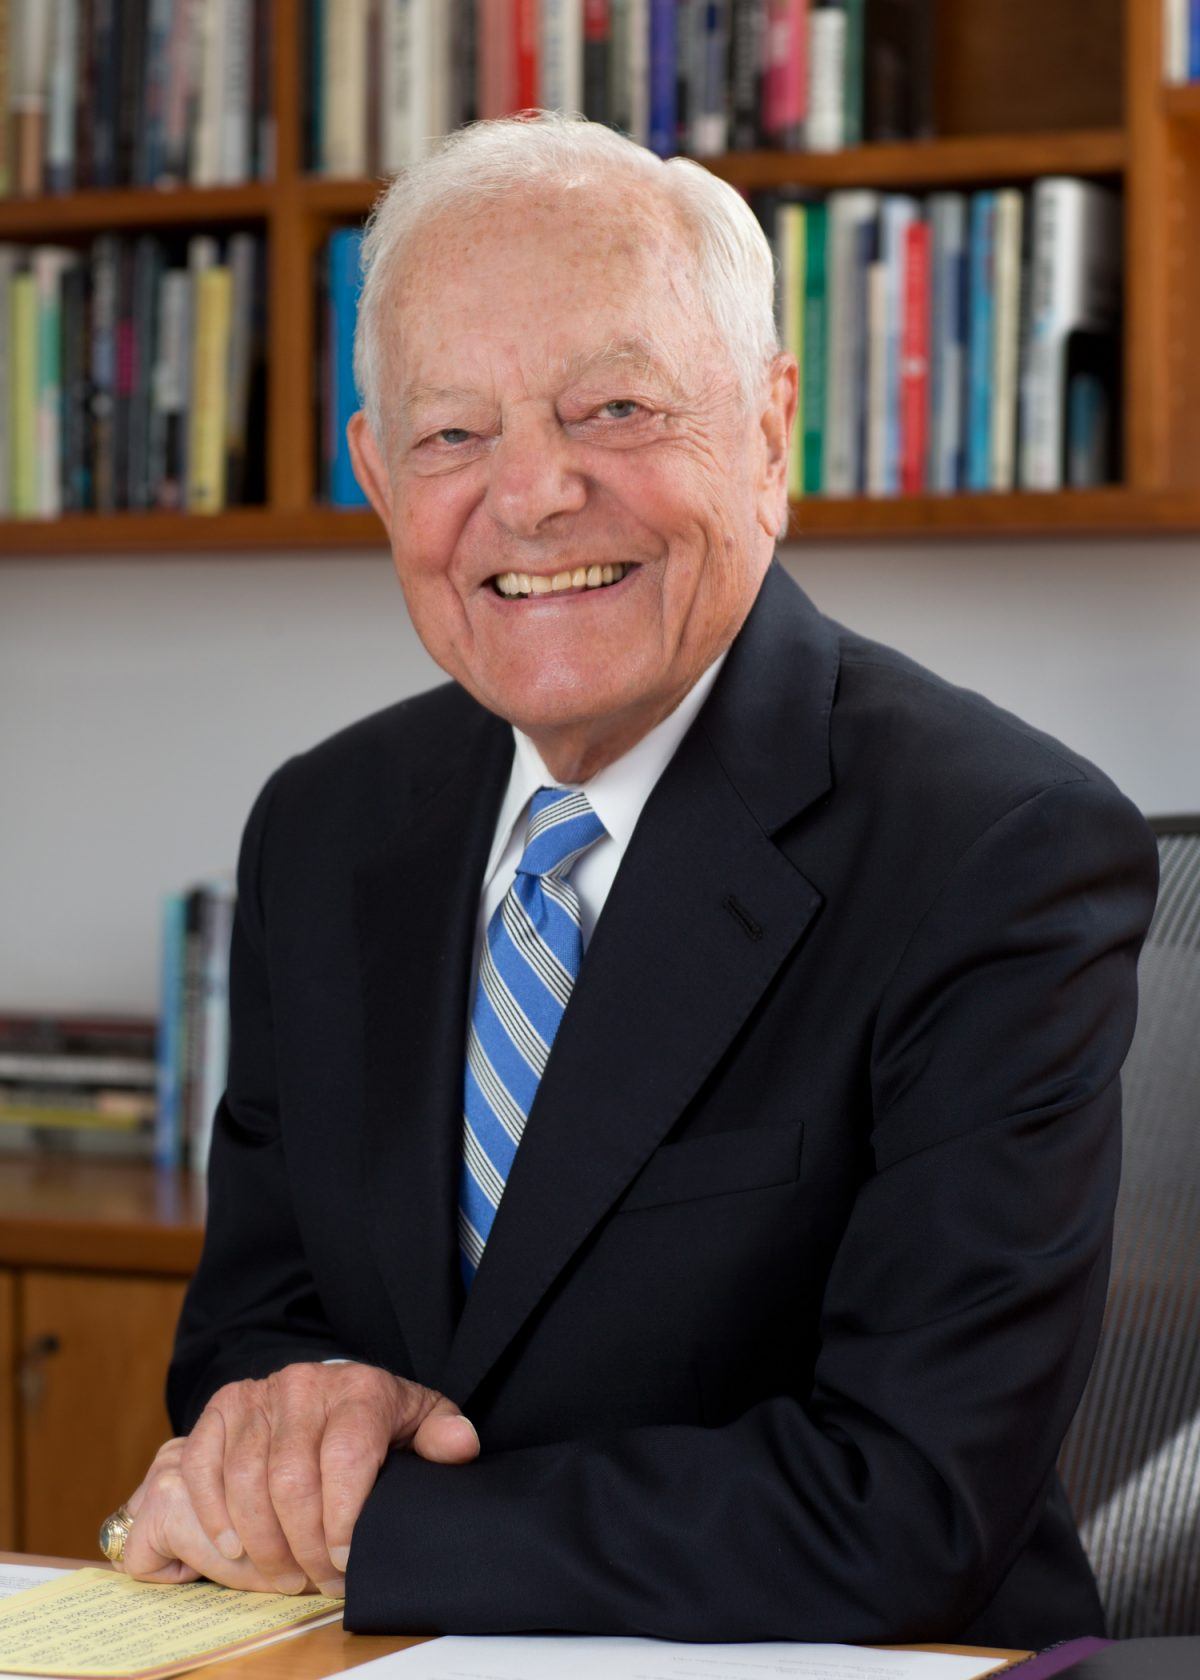 Bob Schieffer, Walter Shorenstein Media and Democracy Fellow; former reporter and anchor for CBS News; former moderator of “Face the Nation”